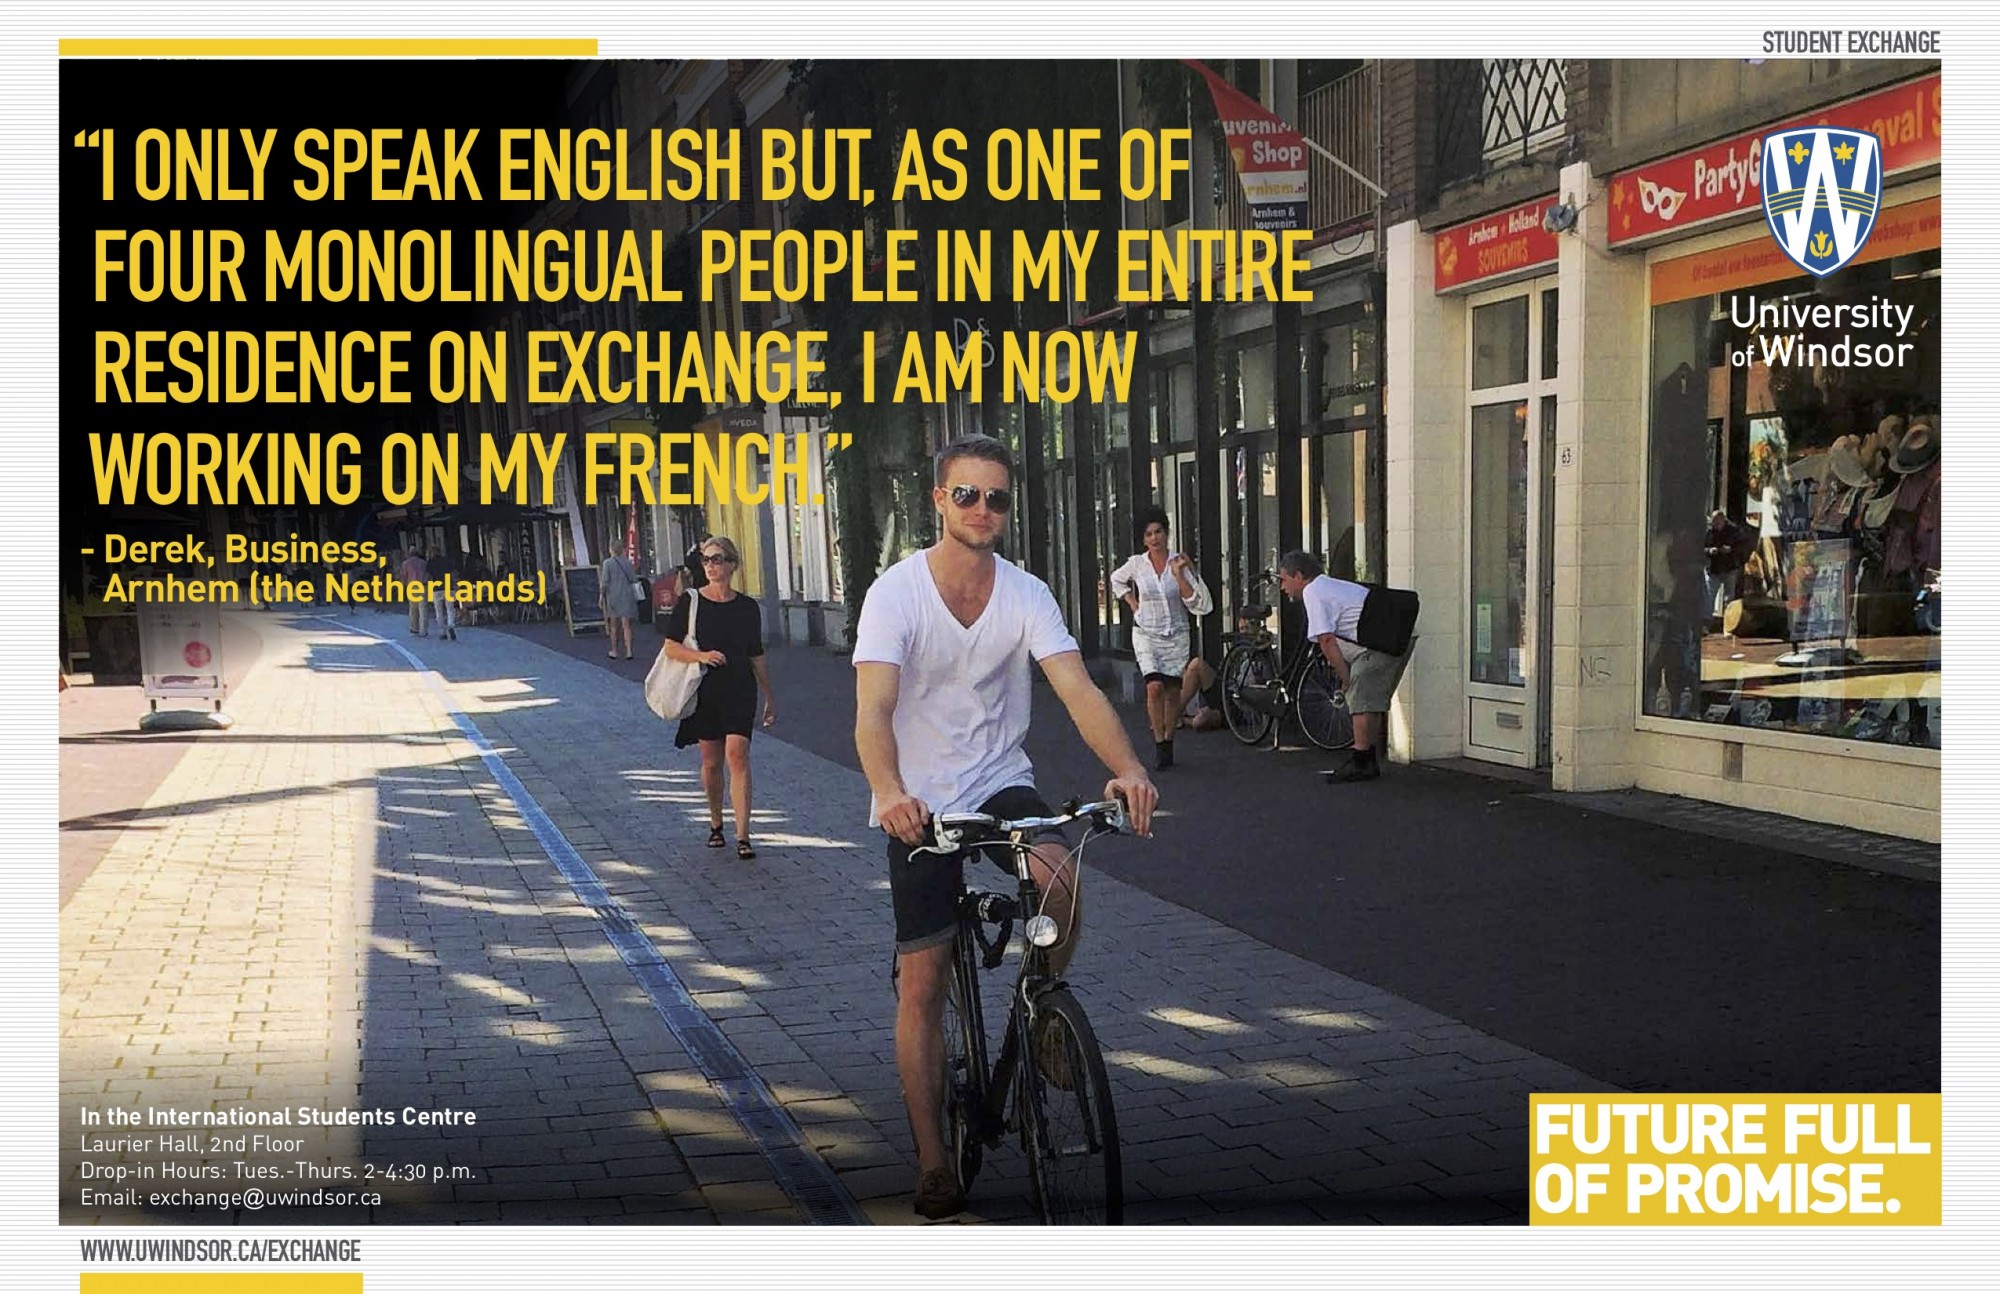 "I only speak English, but as one of only four monolingual people in my entire residence on exchange, I am now working on my French" - Derek